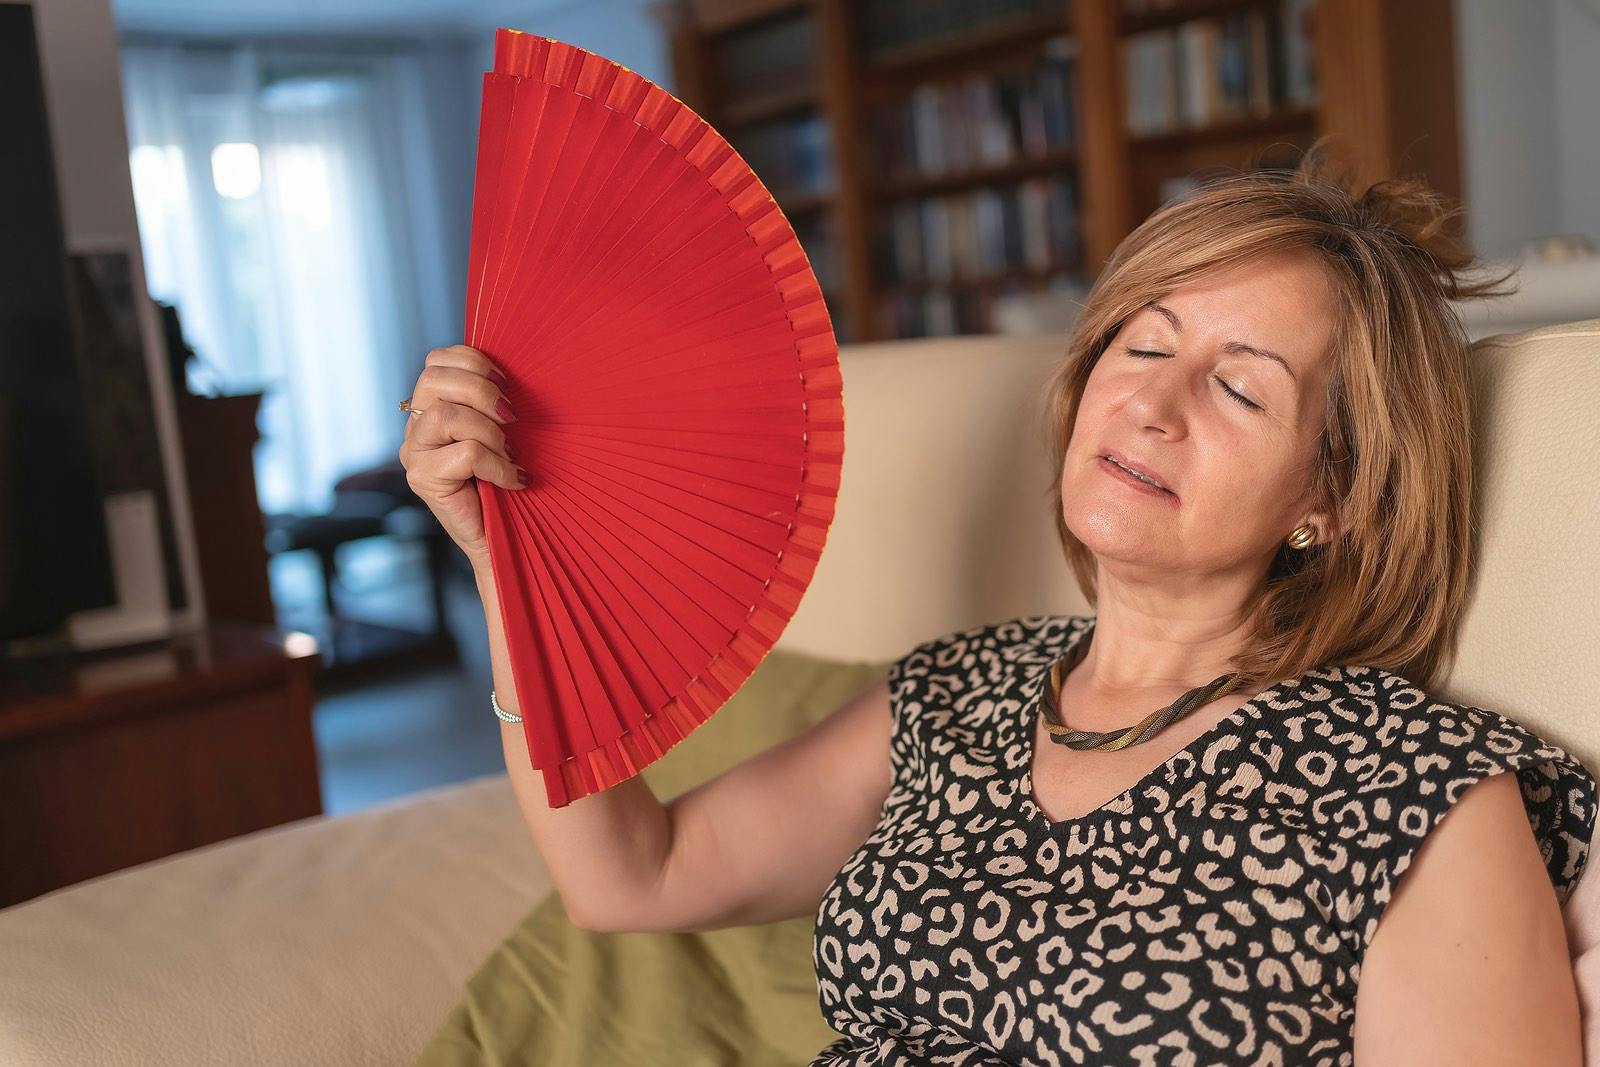 Adult woman fanned by the high heat produced by menopause and hormonal disorder.
